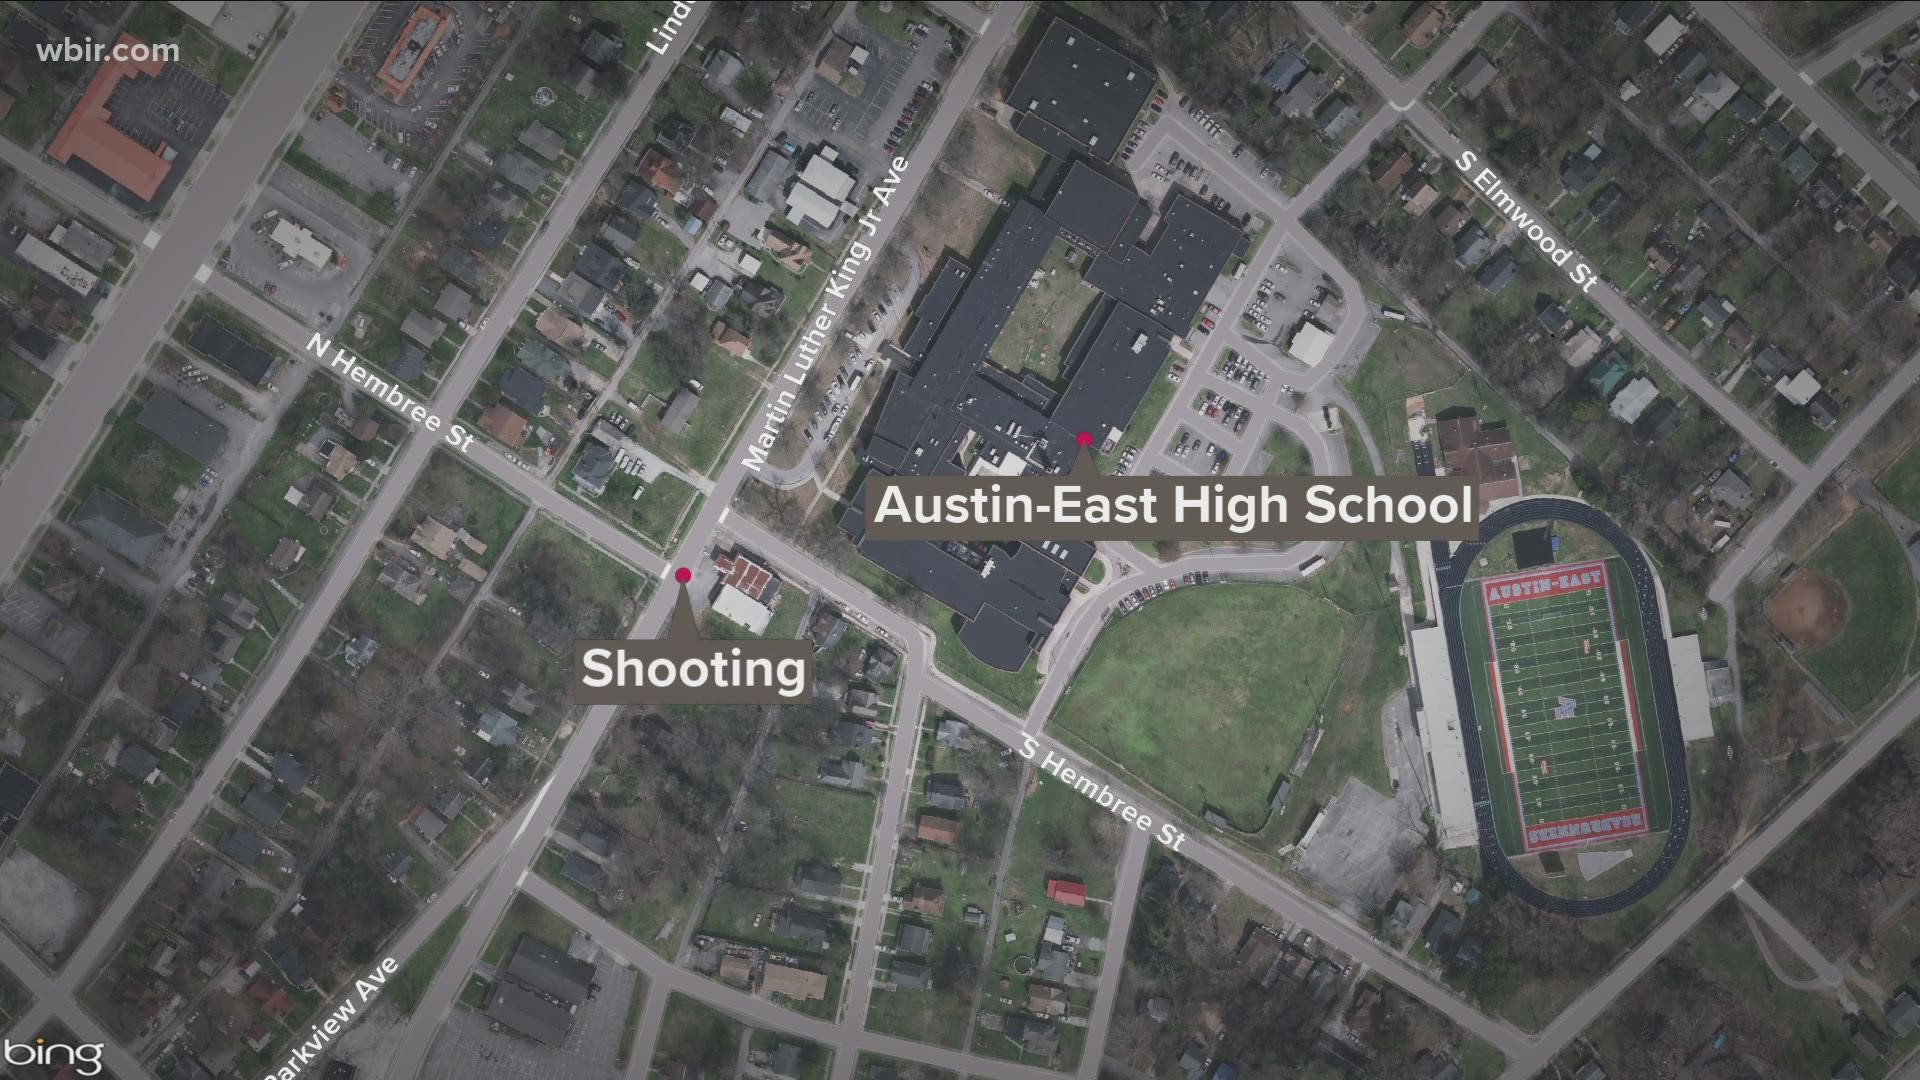 Reports of a shooting near Austin-East High School during its homecoming football game came in at around 9 p.m.